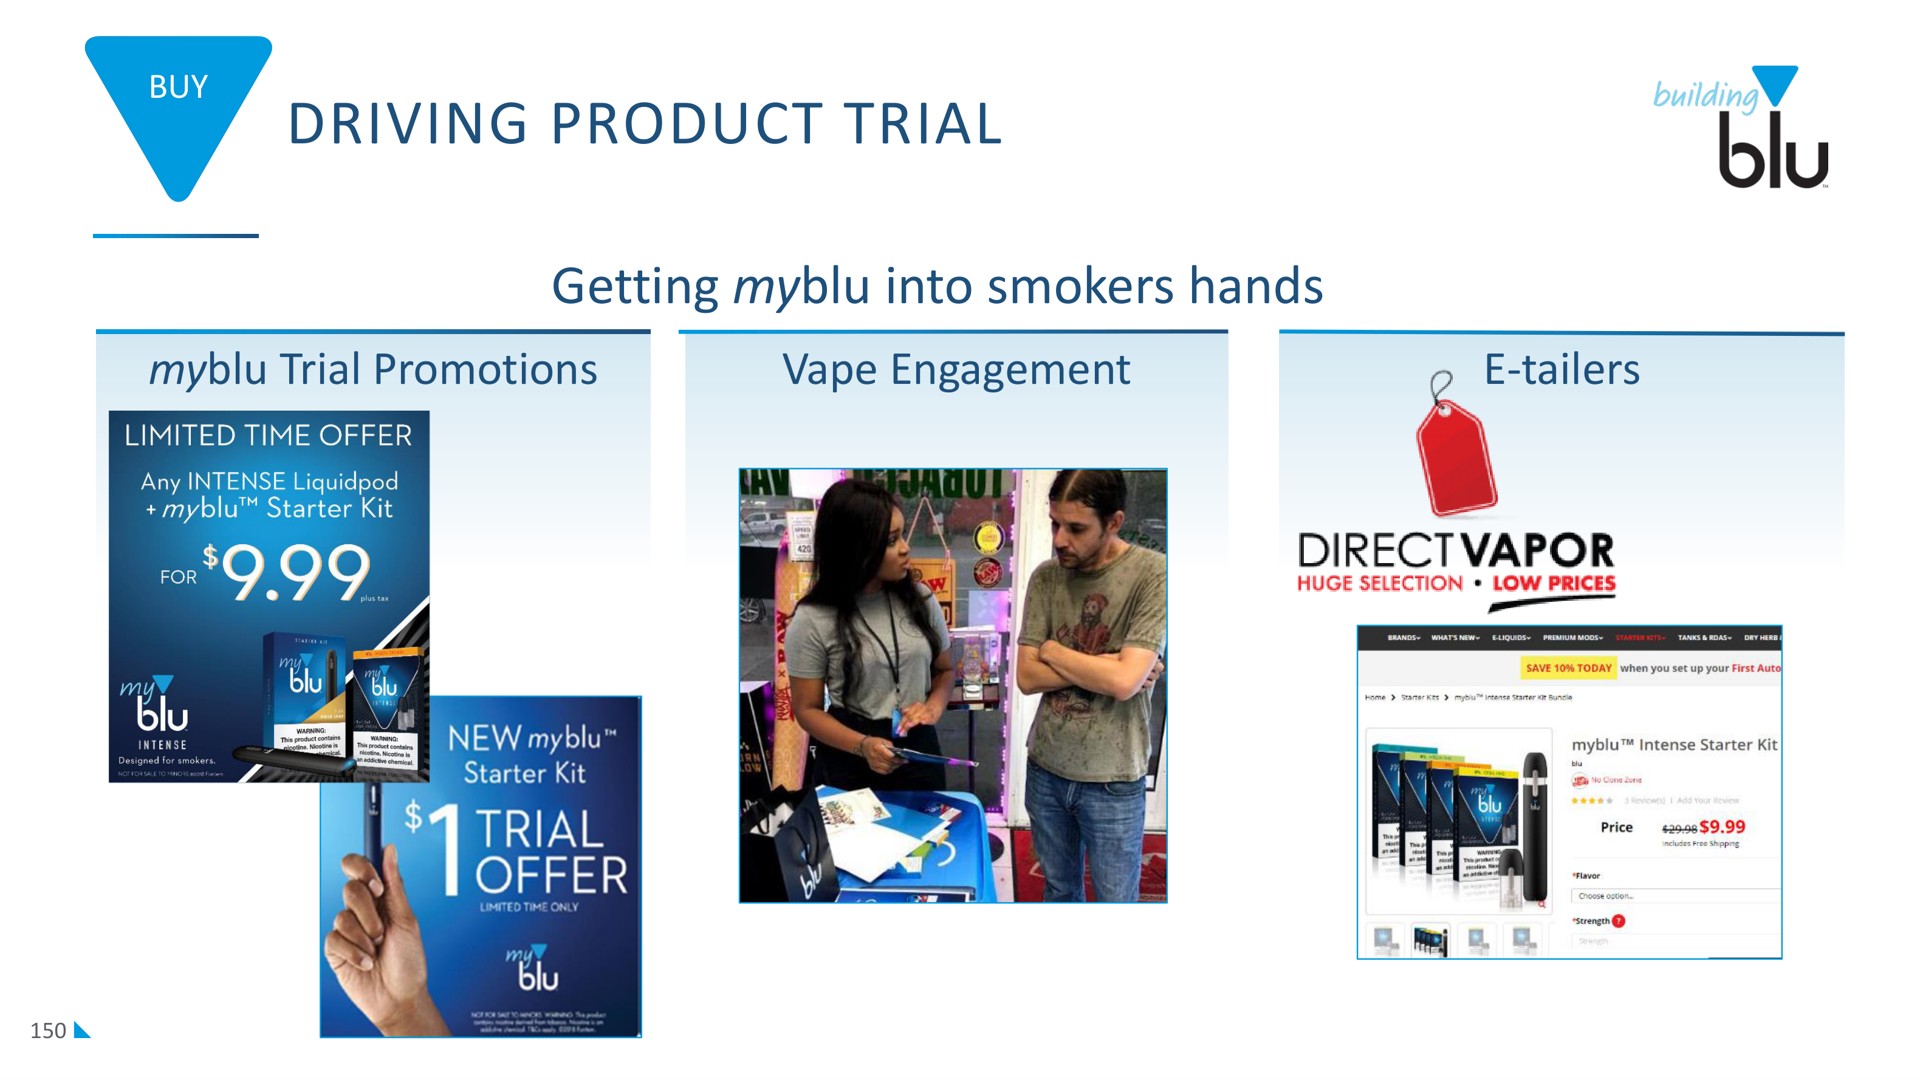 driving product trial | Imperial Brands